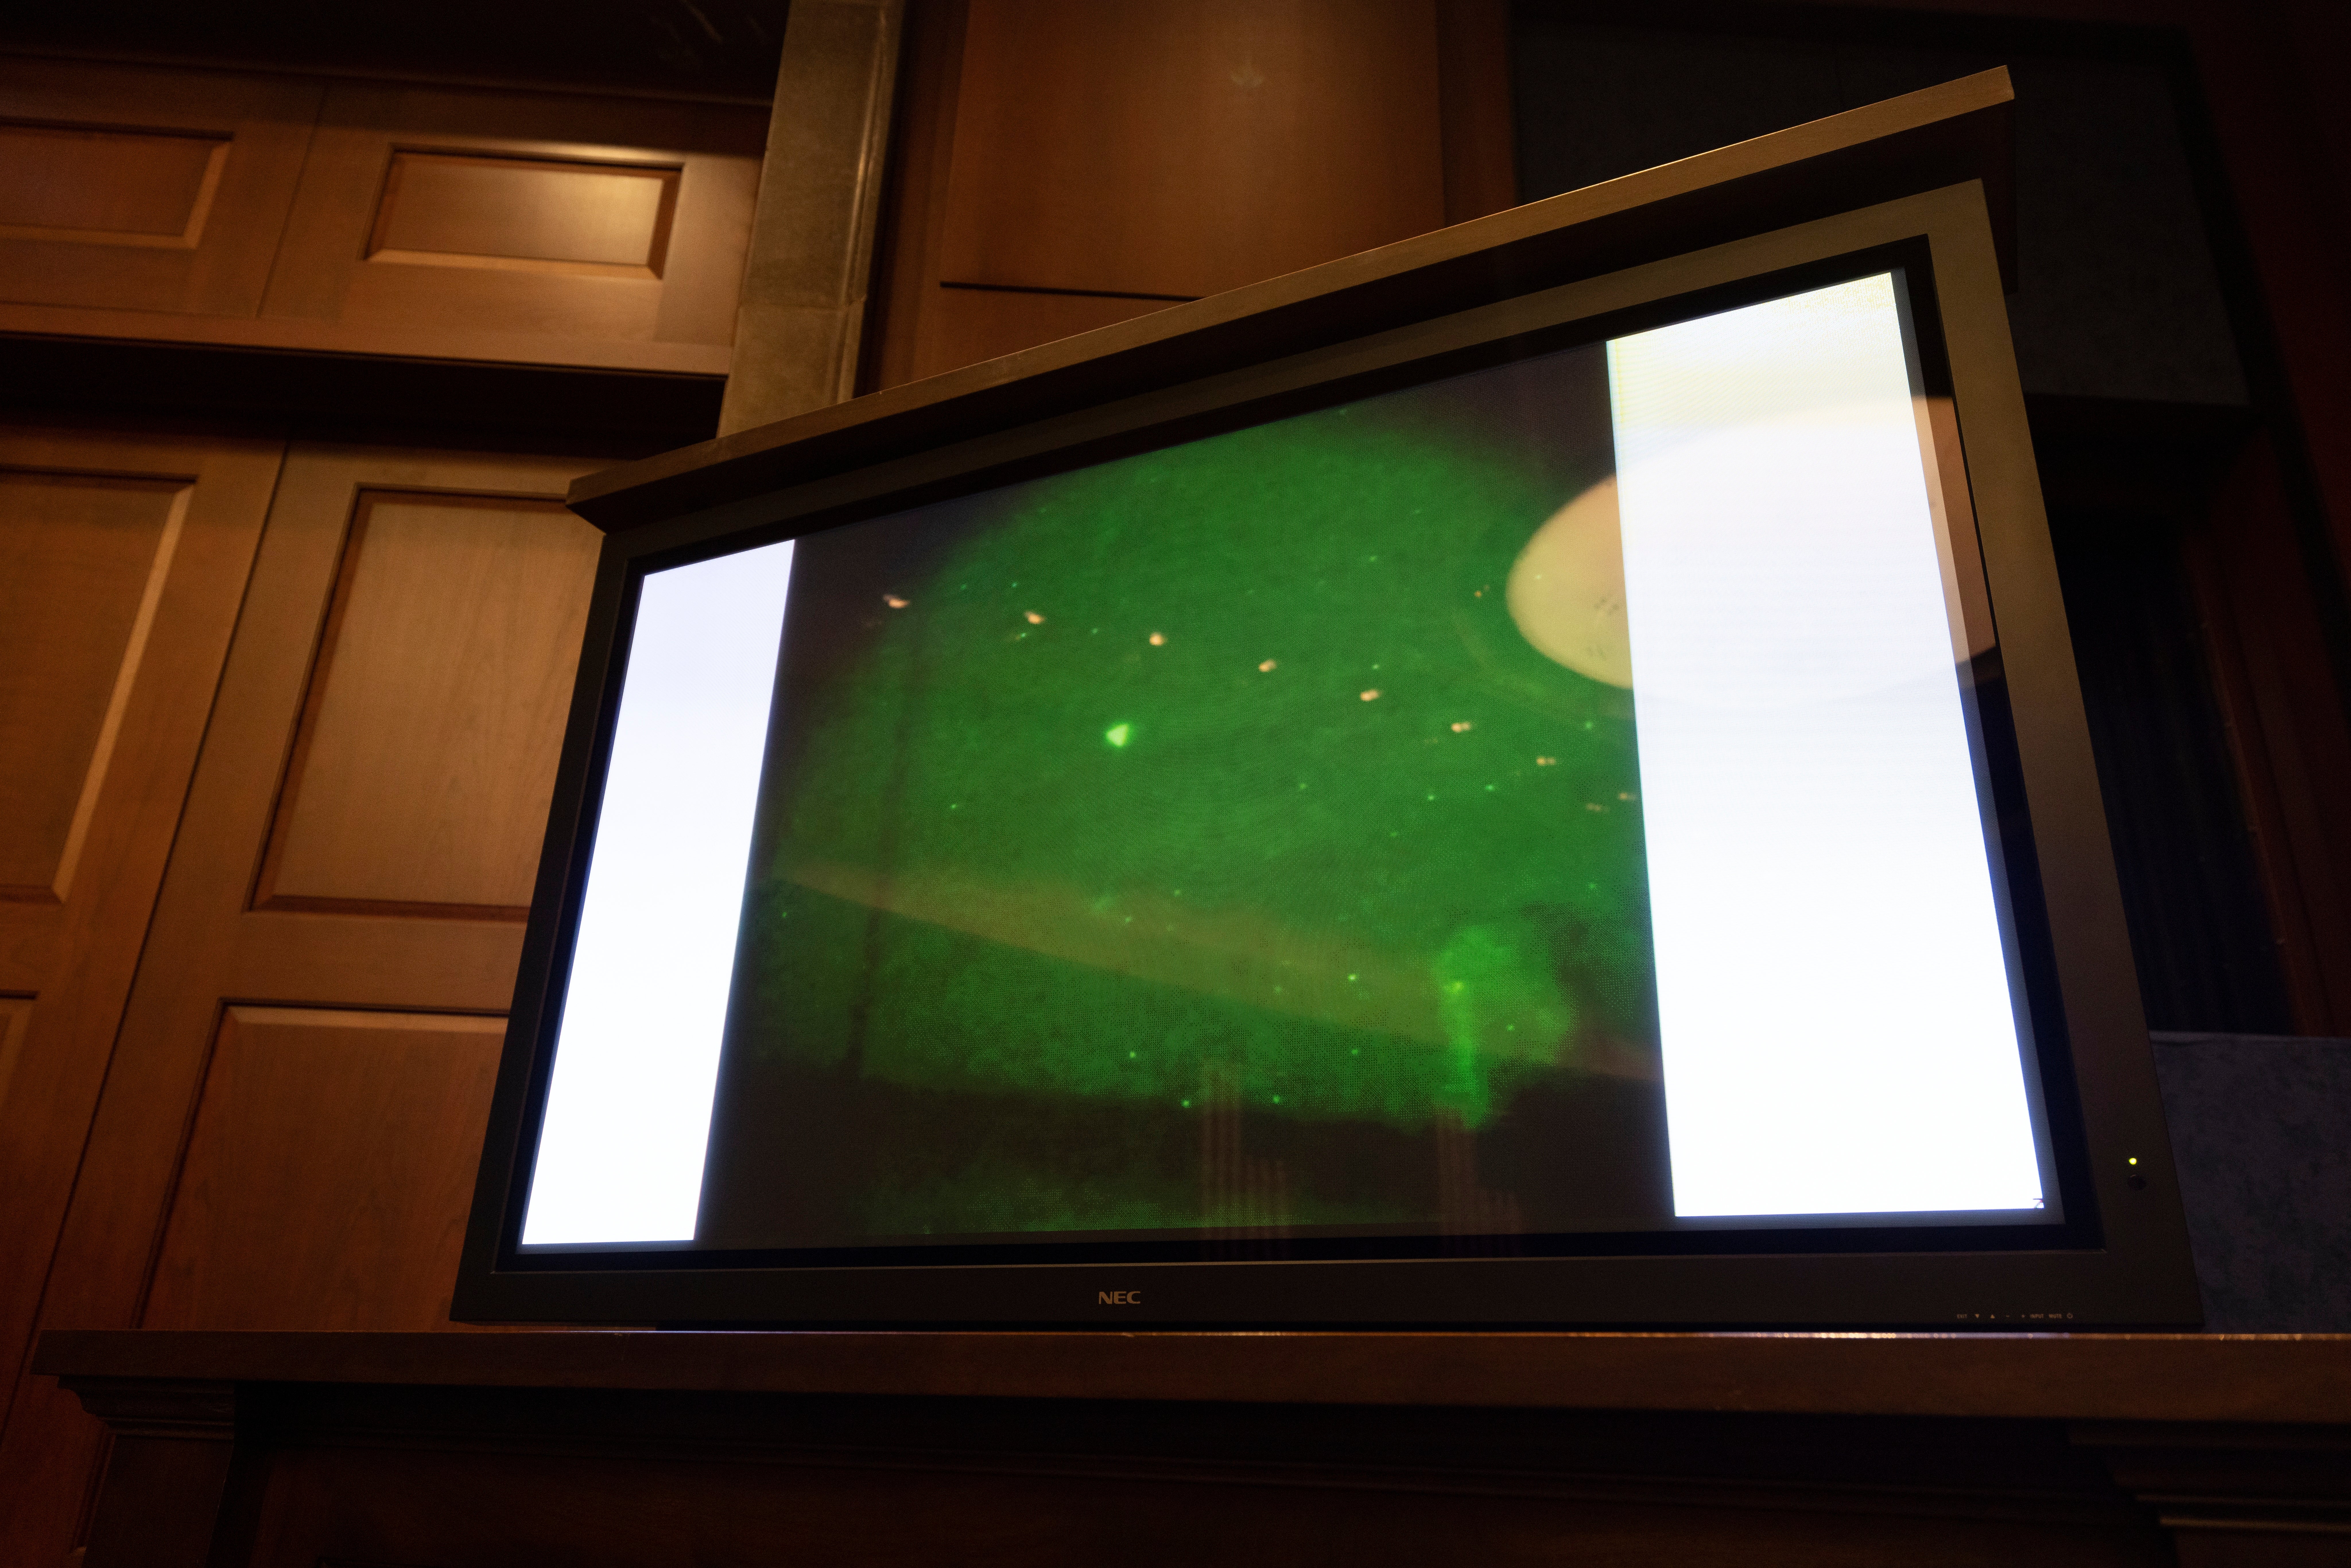 An ‘unidentified aerial phenomena’, commonly referred to as a UFO, is shown on a TV monitor during a House hearing